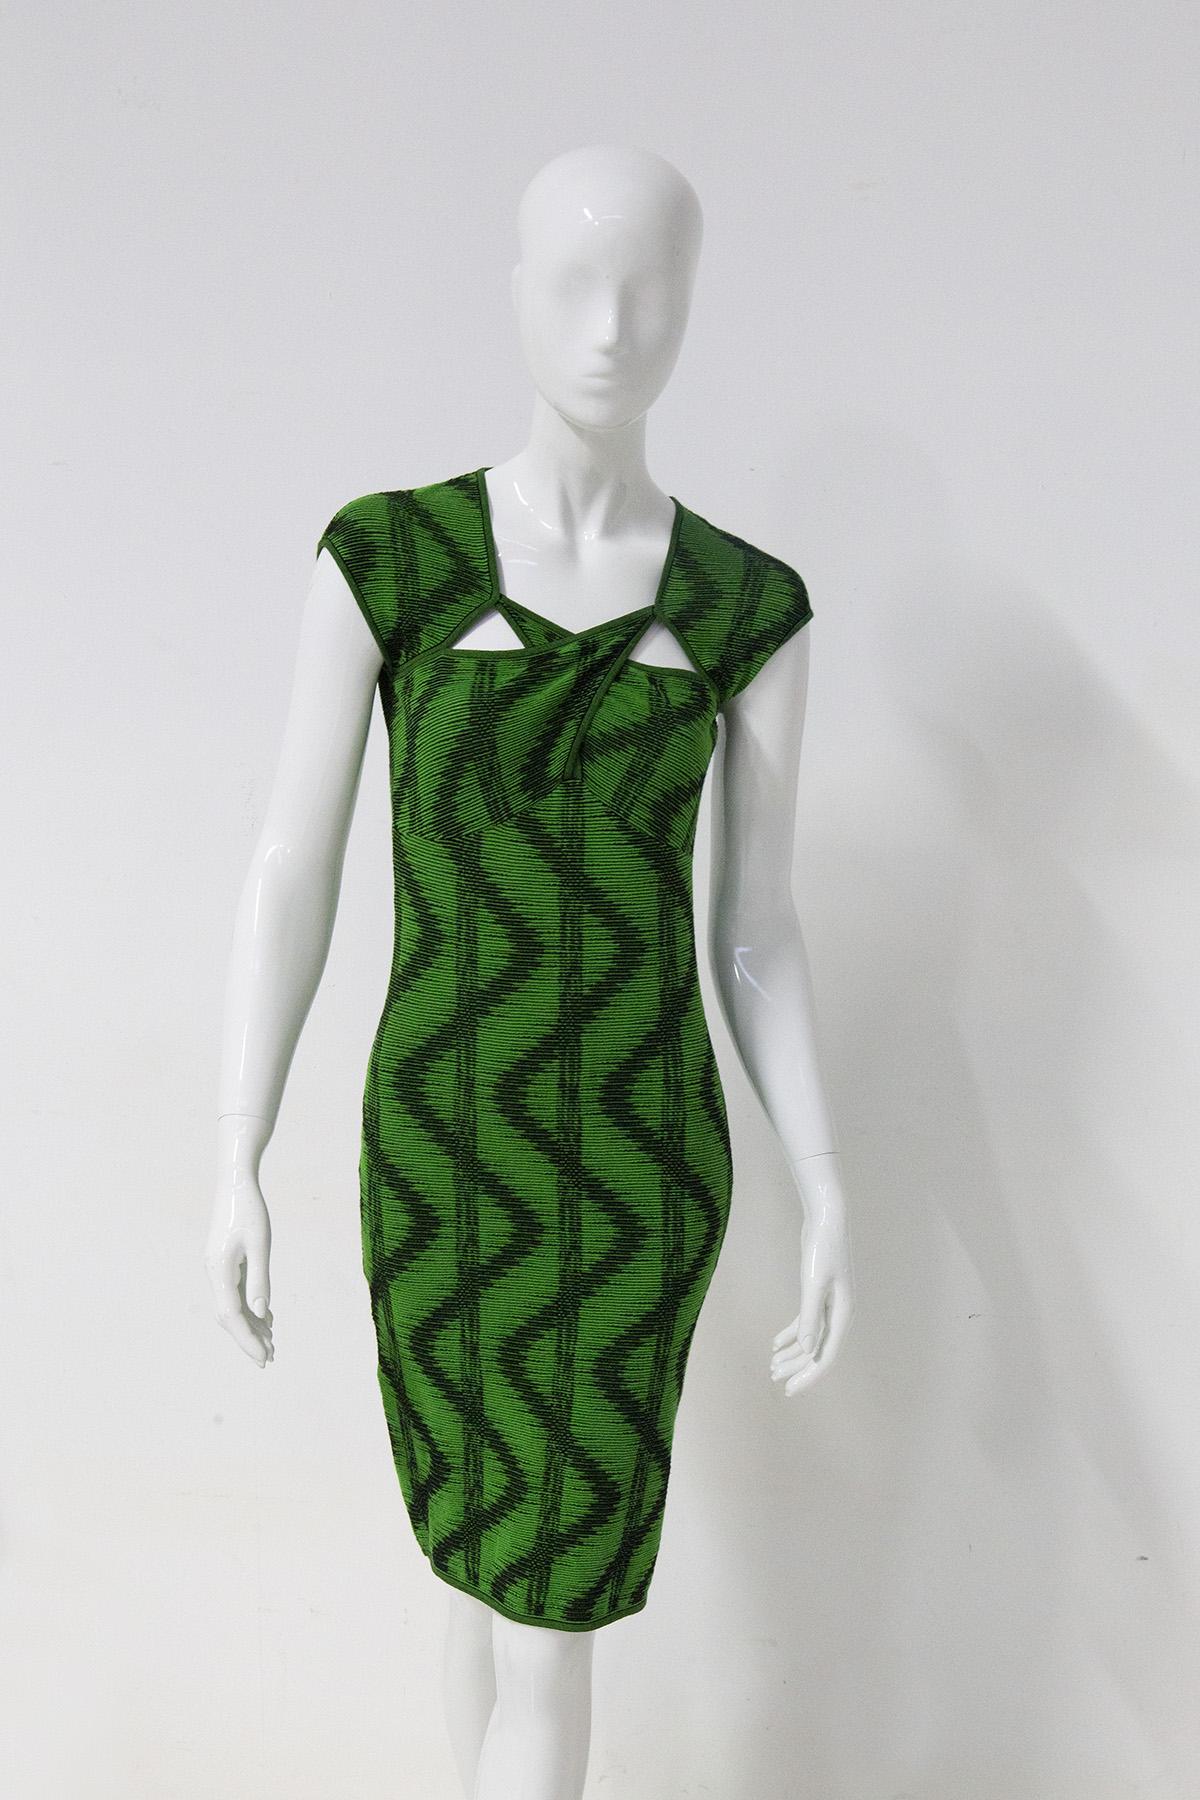 Day dress made of elastic tessUto by Missoni from the early 2000s. The dress is made of elastic fabric with almost psychedelic geometric patterns and textures in green and BLACK. This geometry is very reminiscent of patterns from the space age